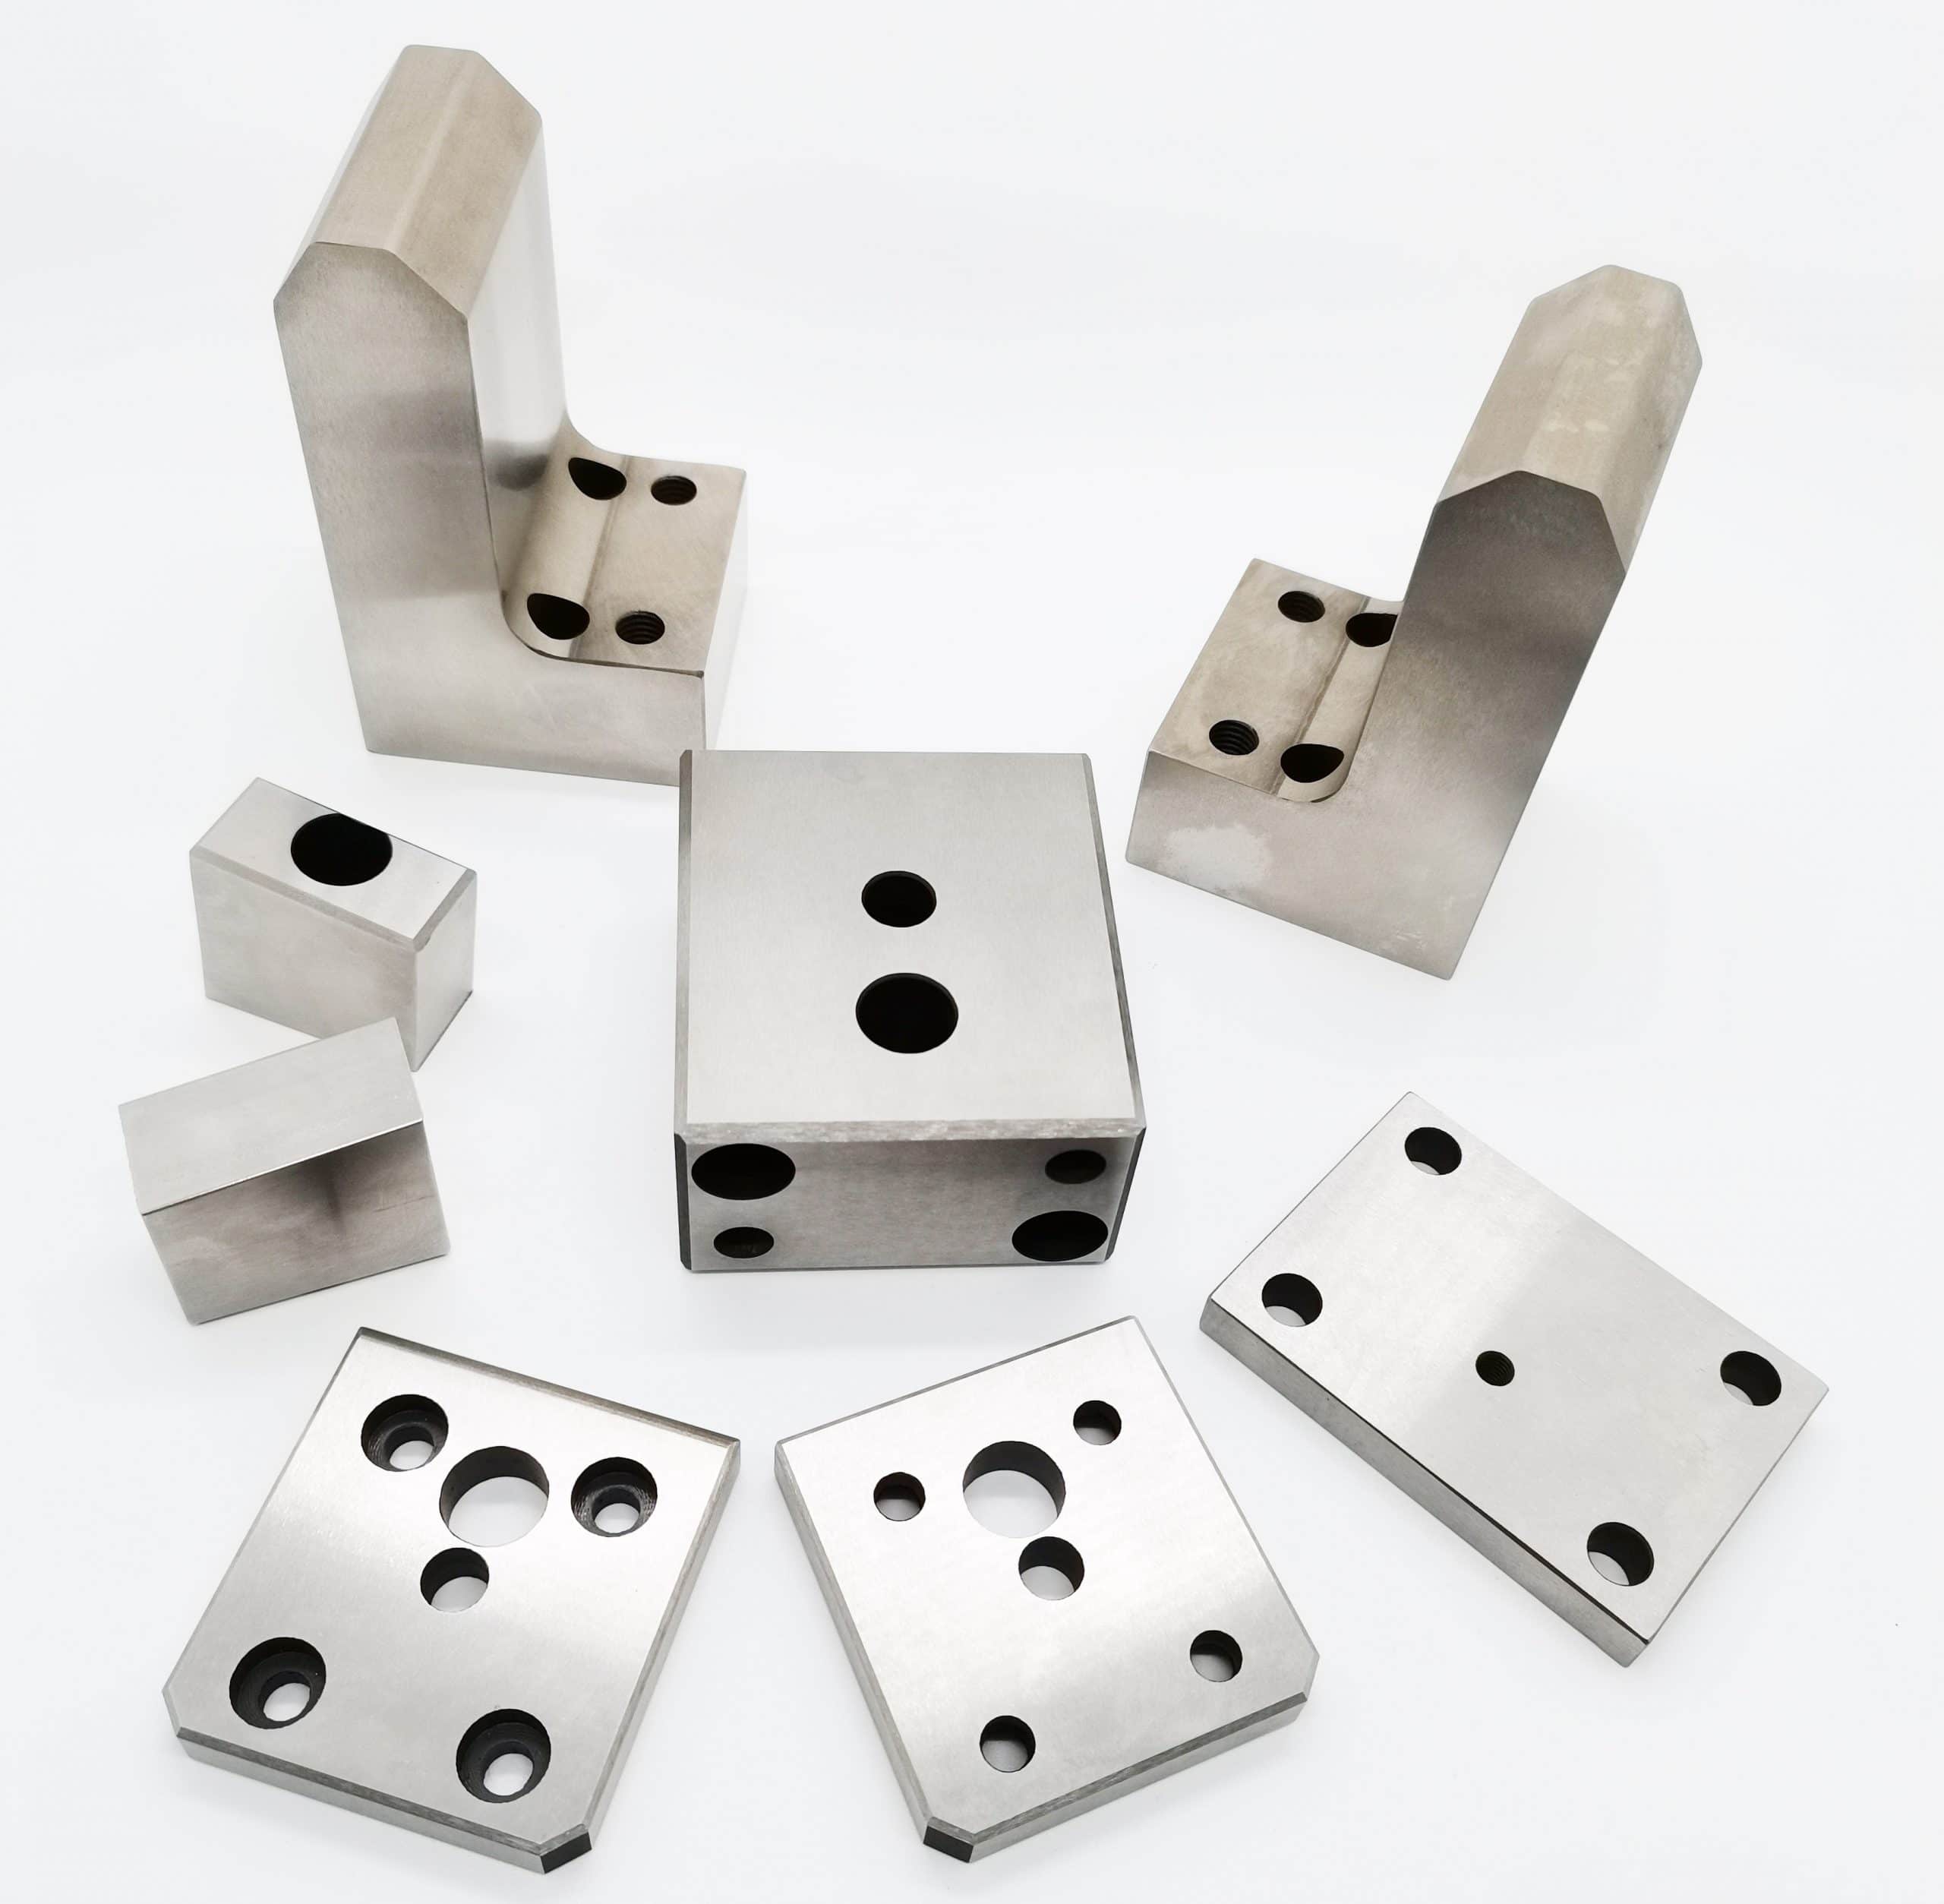 China CNC machining services China Suppliers & Manufacturers - CNC machining services China Companies & Shops - WEIMI